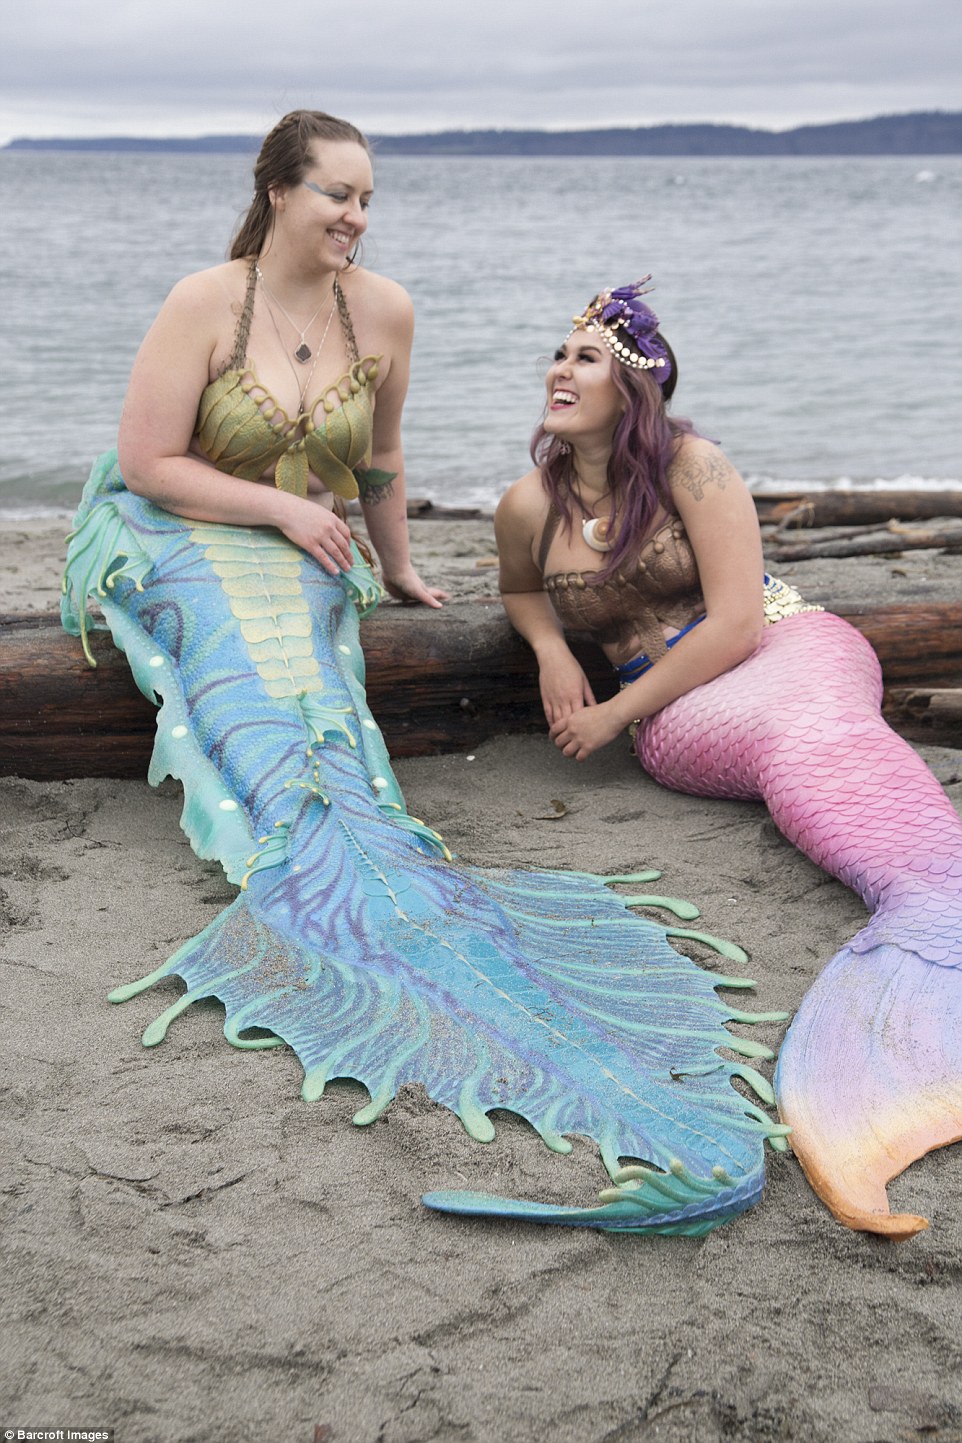 Caitlin (pictured with her friend Tessie, right) quit her job in 2015 to focus on her life as a mermaid. She created the sea serpent inspired tail in this photograph - it took her a year to make from silicone